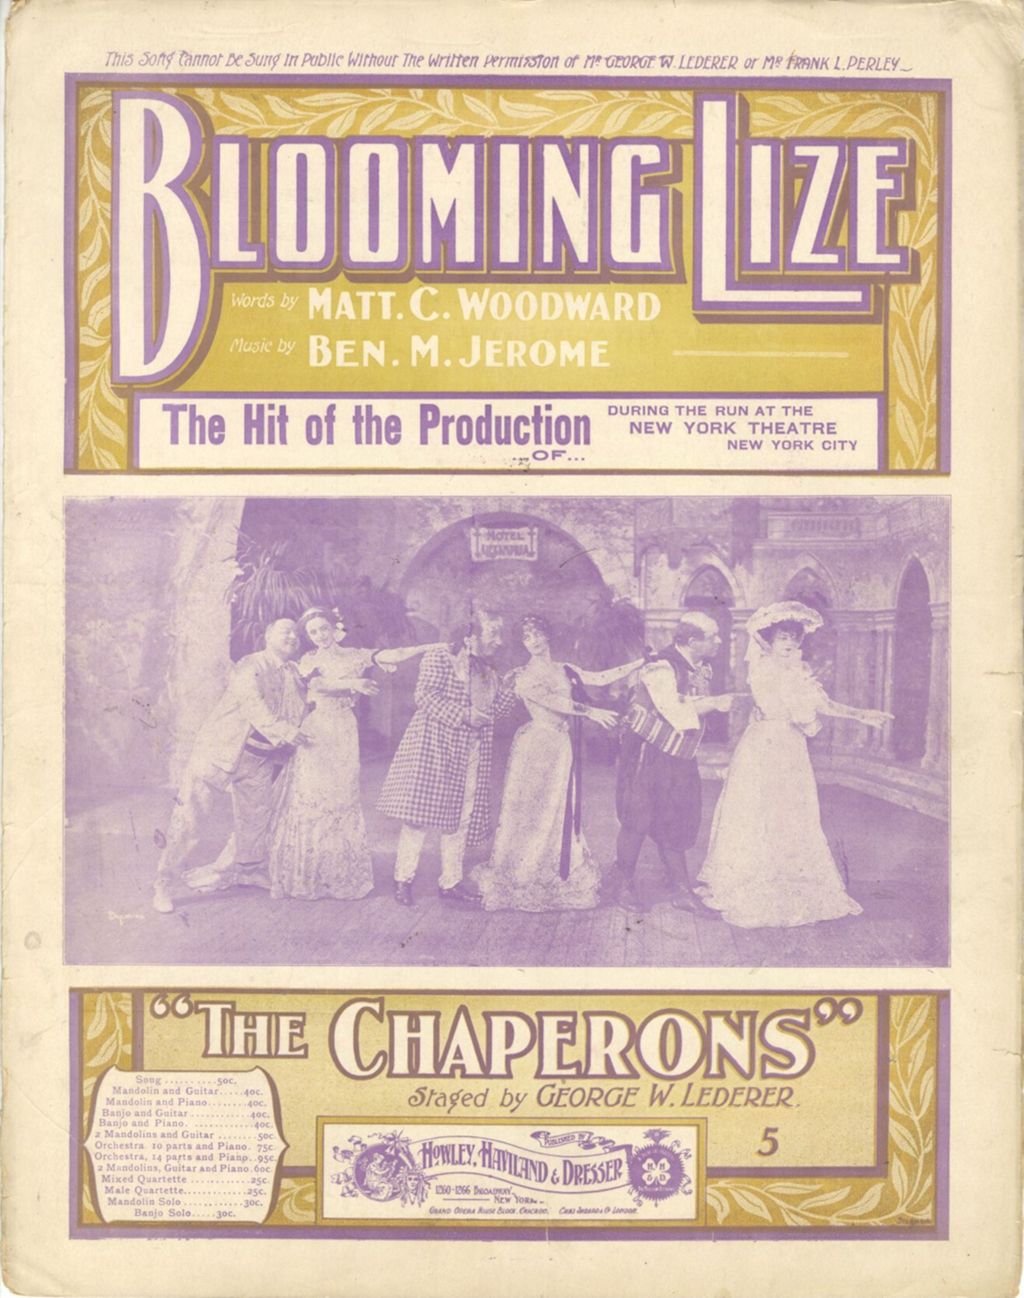 Blooming Lize